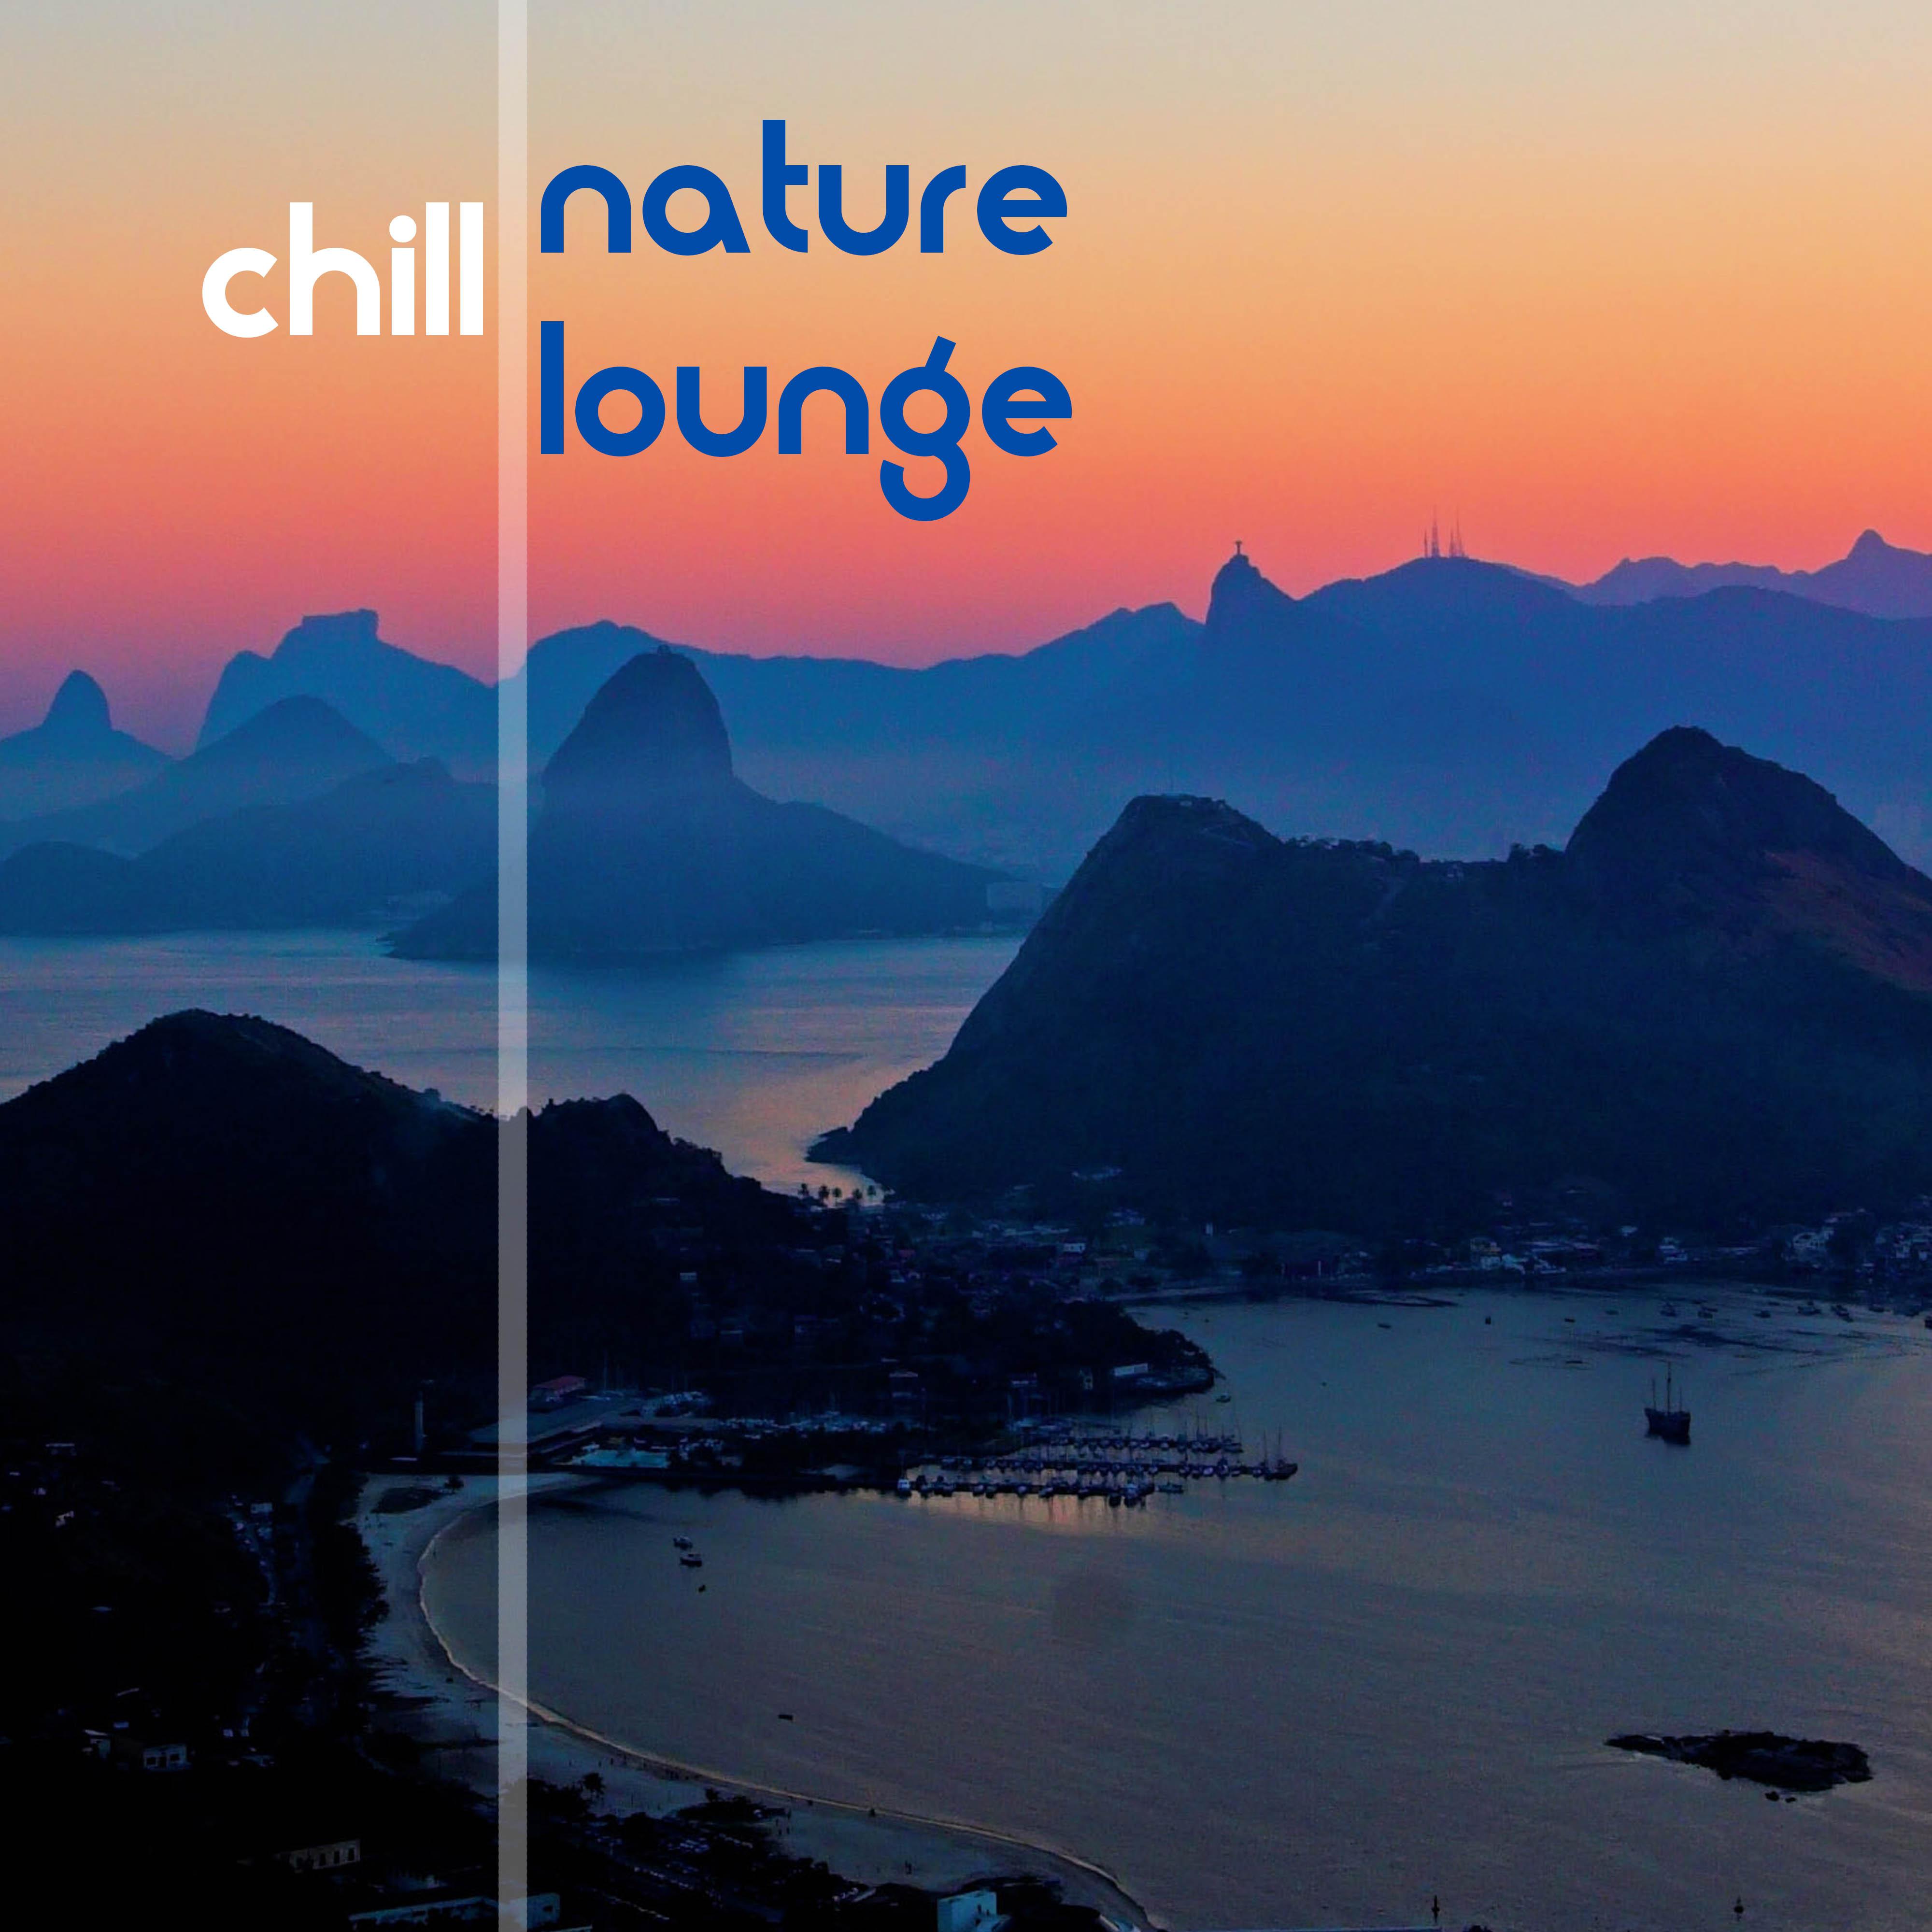 Chill Nature Lounge - Natural Sounds for Chillout Bars